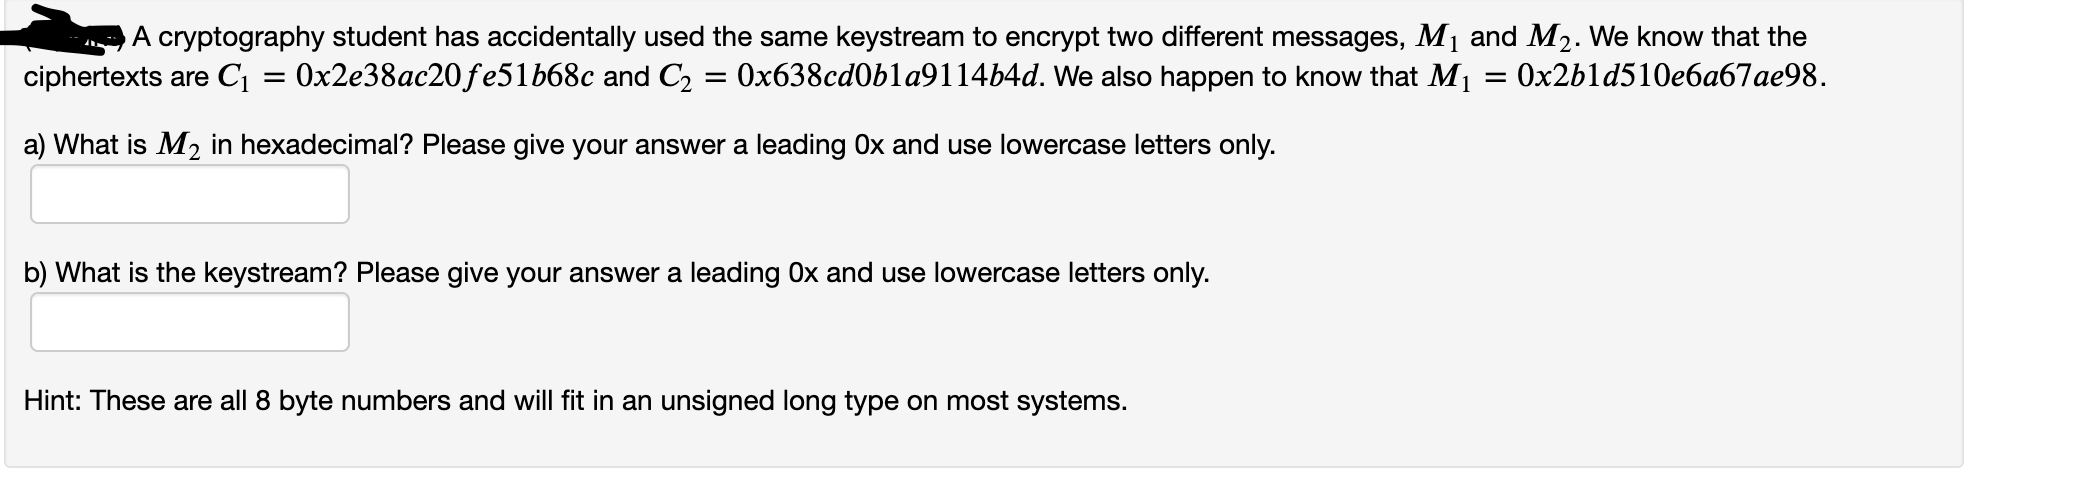 A cryptography student has accidentally used the same keystream to encrypt two different messages, M1 and M2. We know that the
Ox2b1d510e6a67ae98.
ciphertexts are Cı = 0x2e38ac20fe51b68c and C2 = 0x638cd0bla9114b4d. We also happen to know that M1
a) What is M2 in hexadecimal? Please give your answer a leading Ox and use lowercase letters only.
b) What is the keystream? Please give your answer a leading Ox and use lowercase letters only.
Hint: These are all 8 byte numbers and will fit in an unsigned long type on most systems.
